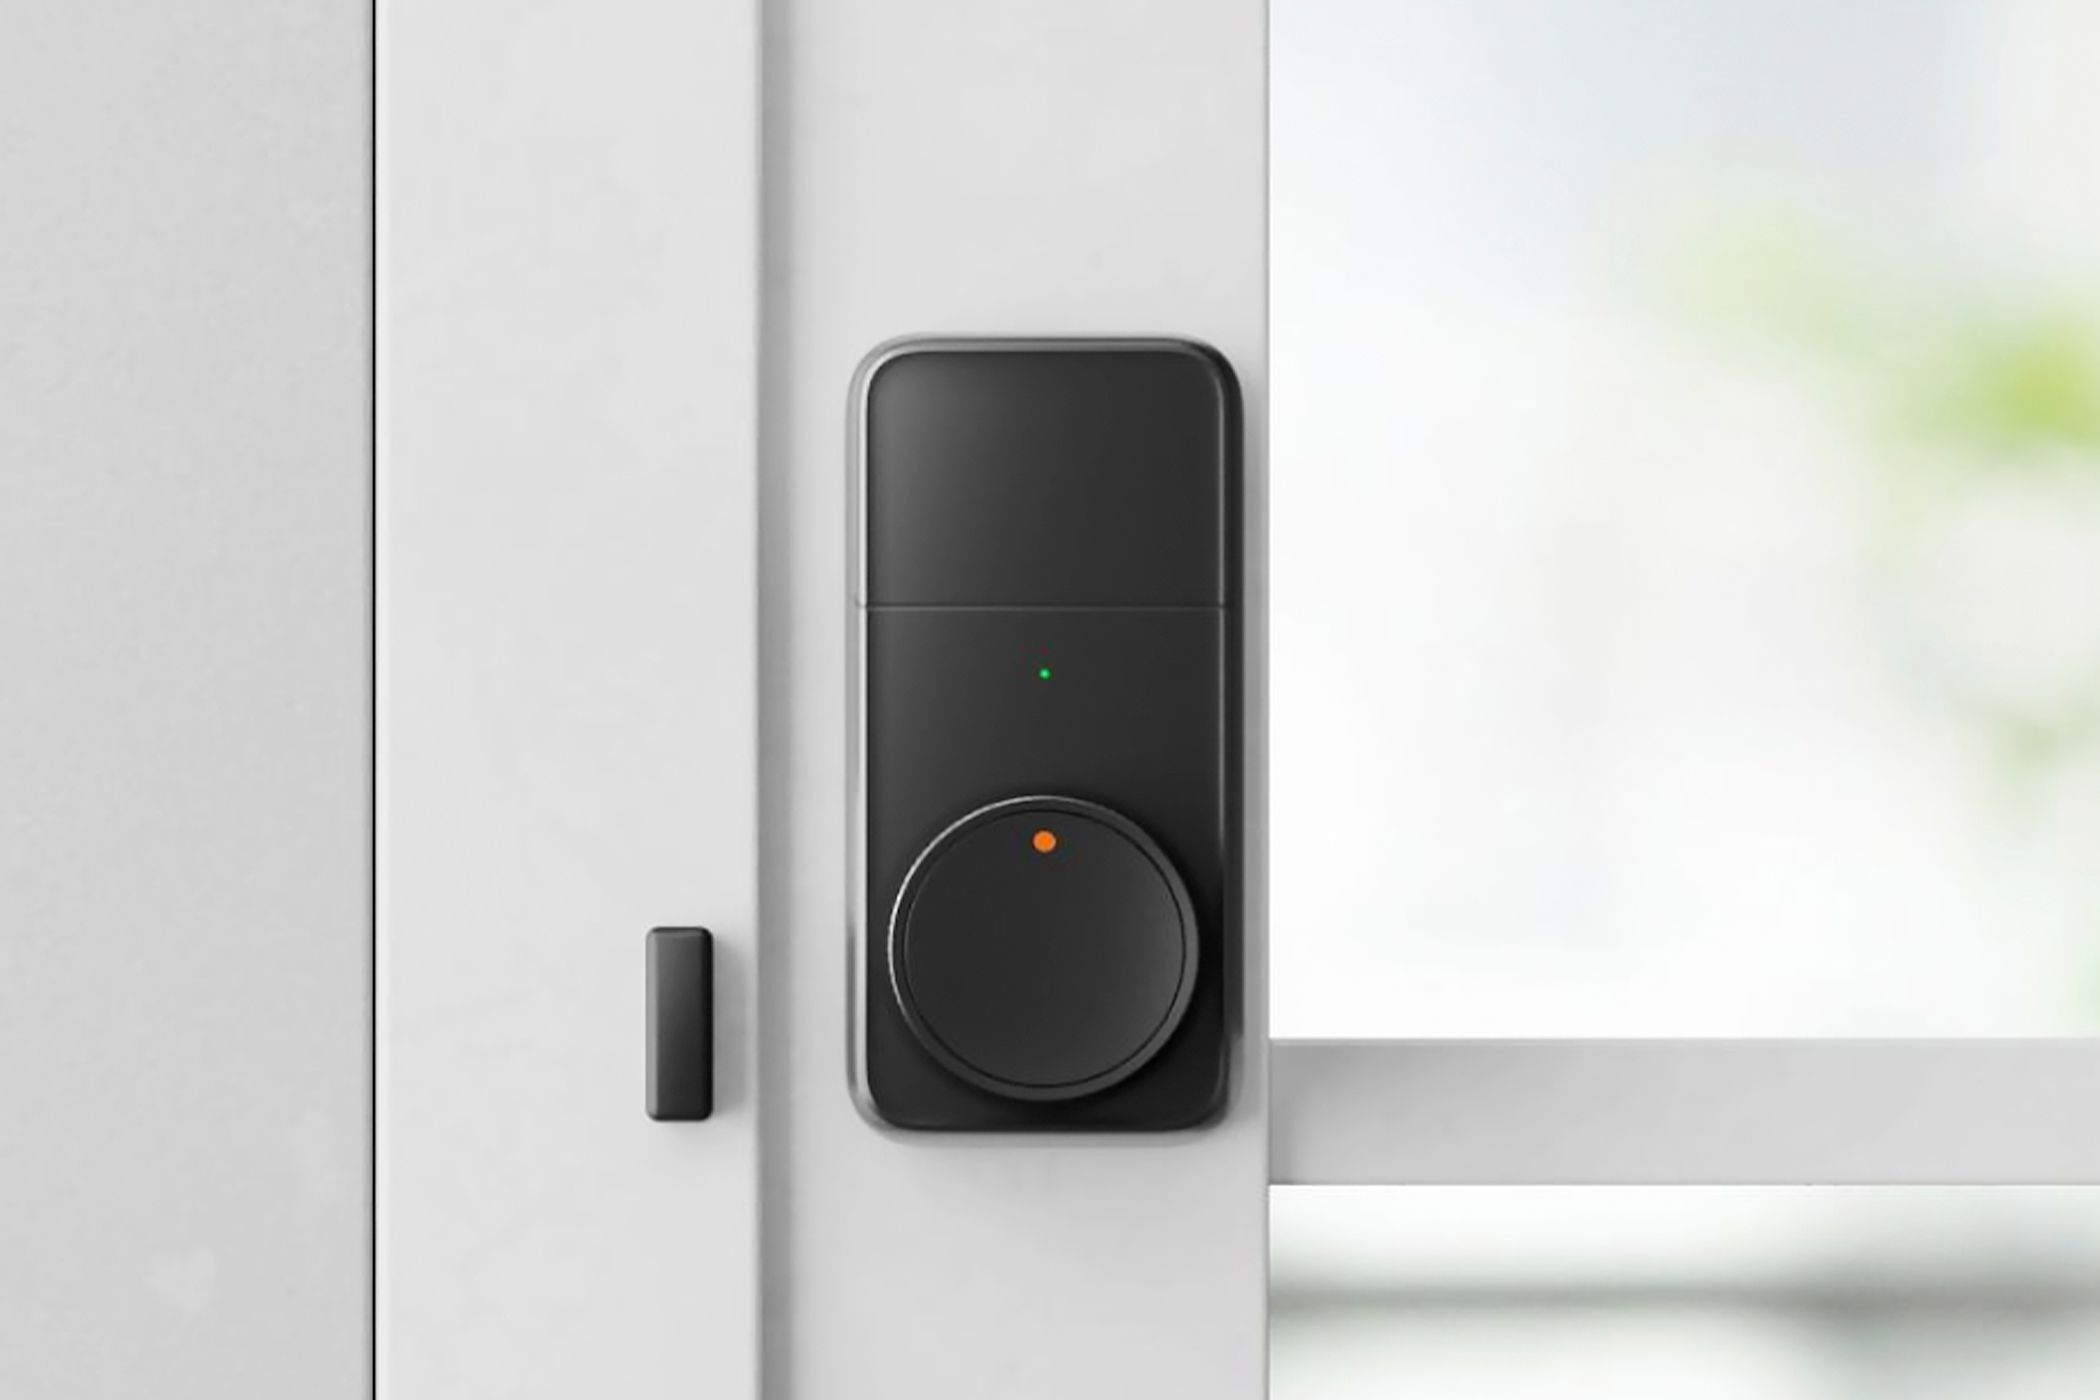 The SwitchBot Lock Pro installed on a door.